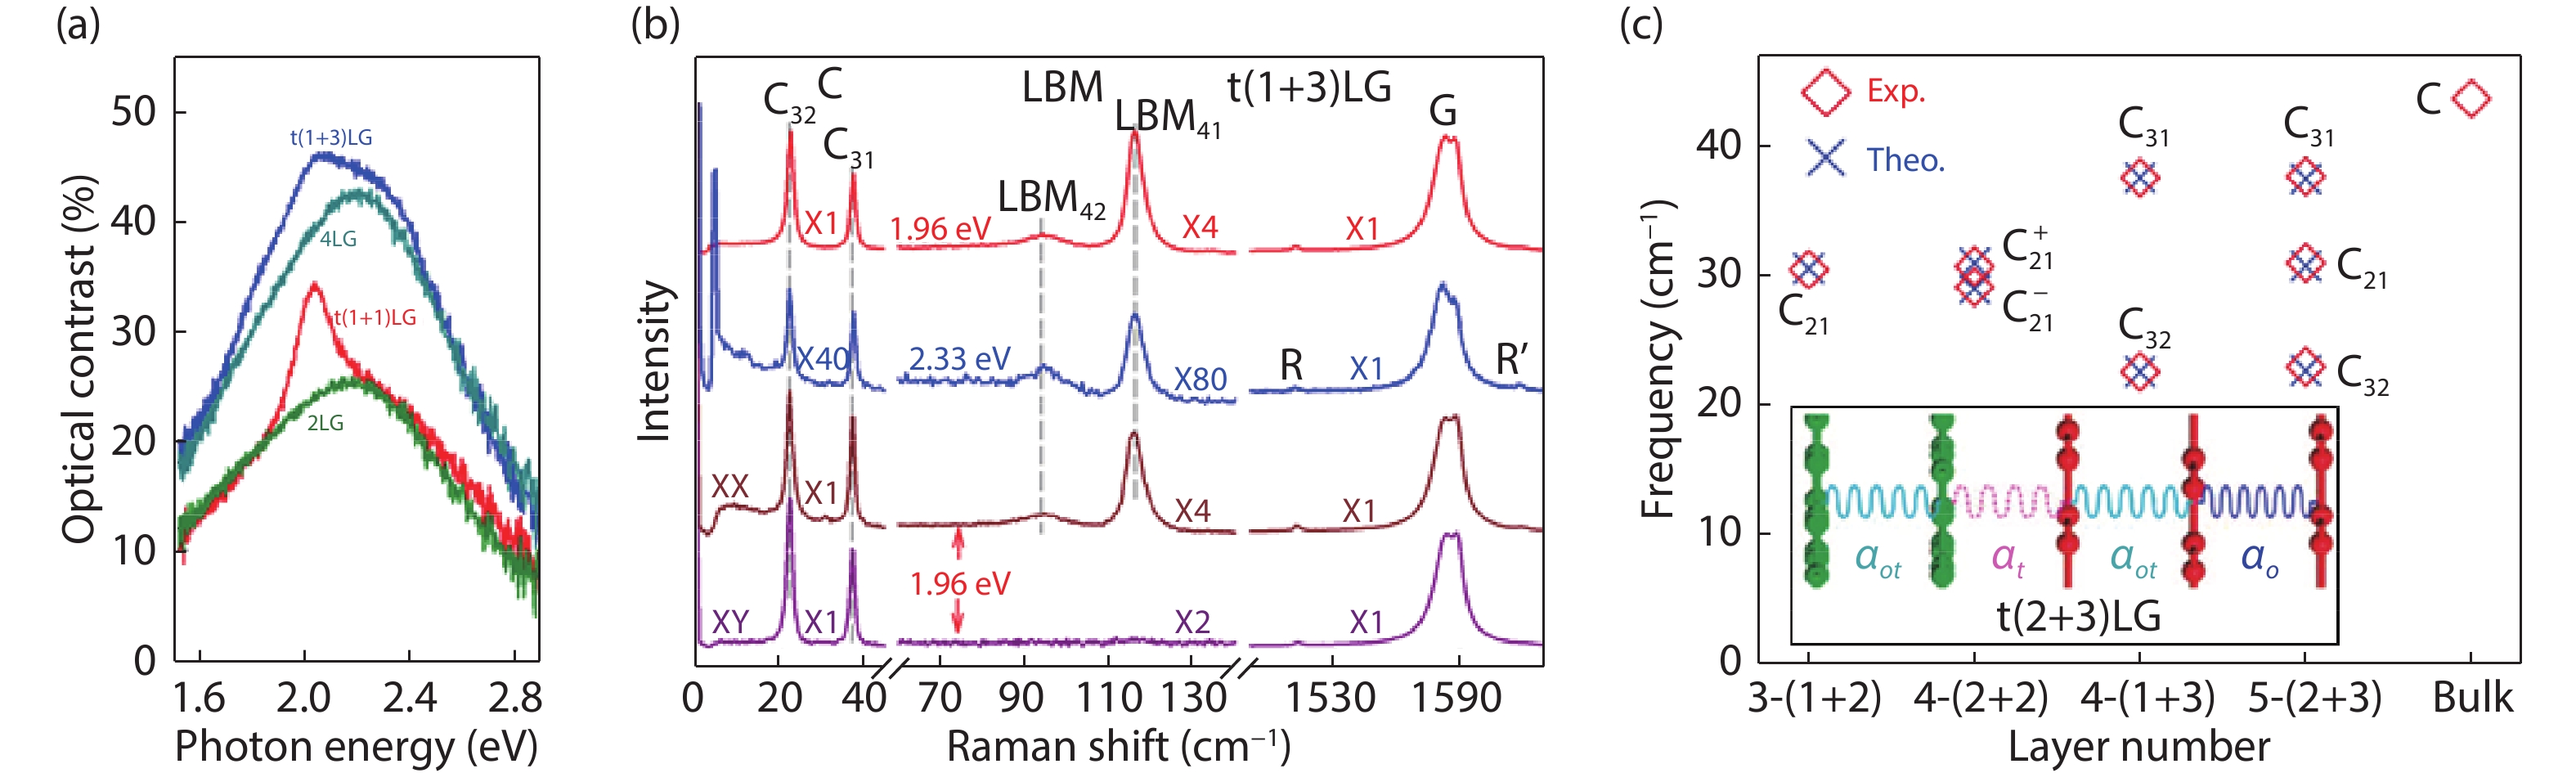 (Color online) (a) Optical contrast of a flake comprising a t(1+1)LG and a t(1+3)LG[7]. (b) Raman spectra in the spectral range of the C, LB and G modes for t(1+3)LG. Polarized Raman spectra are also shown to identify the C and LB modes[8]. (c) Experimental (Exp., open diamonds) and theoretical (Theo., crosses) (C) in t(m + n)LGs. The insert shows a schematic diagram of a linear chain model for t(2+3)LG including a bulk-like interlayer force constant , interfacial force constant and the force constant for the layers adjacent to the interface[7].